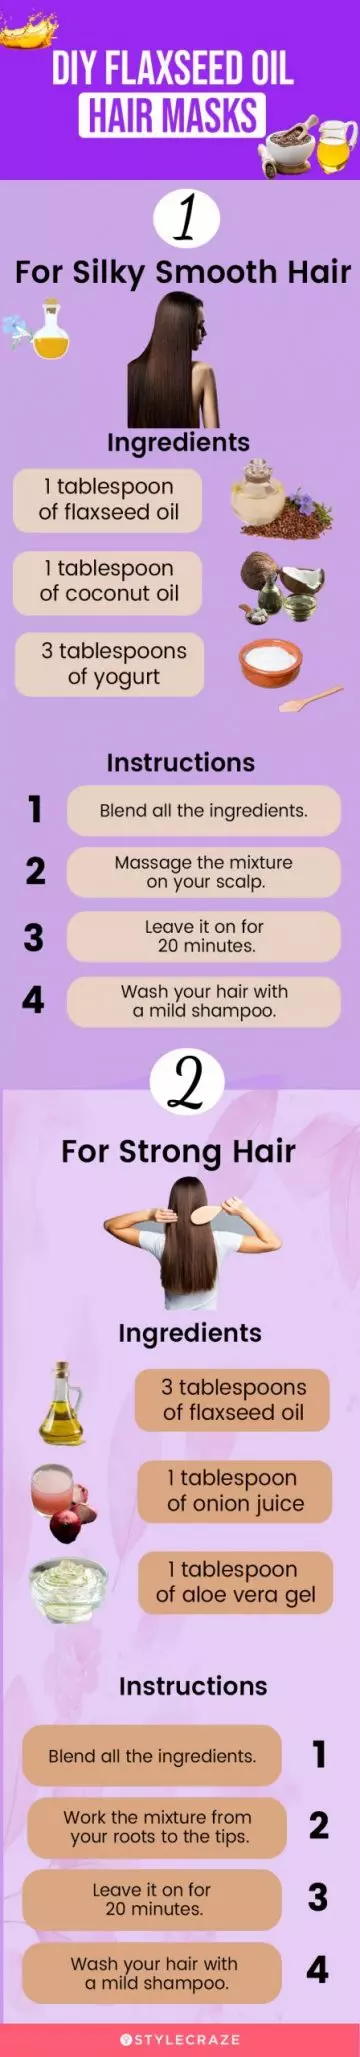 diy flaxseed oil hair masks (infographic)